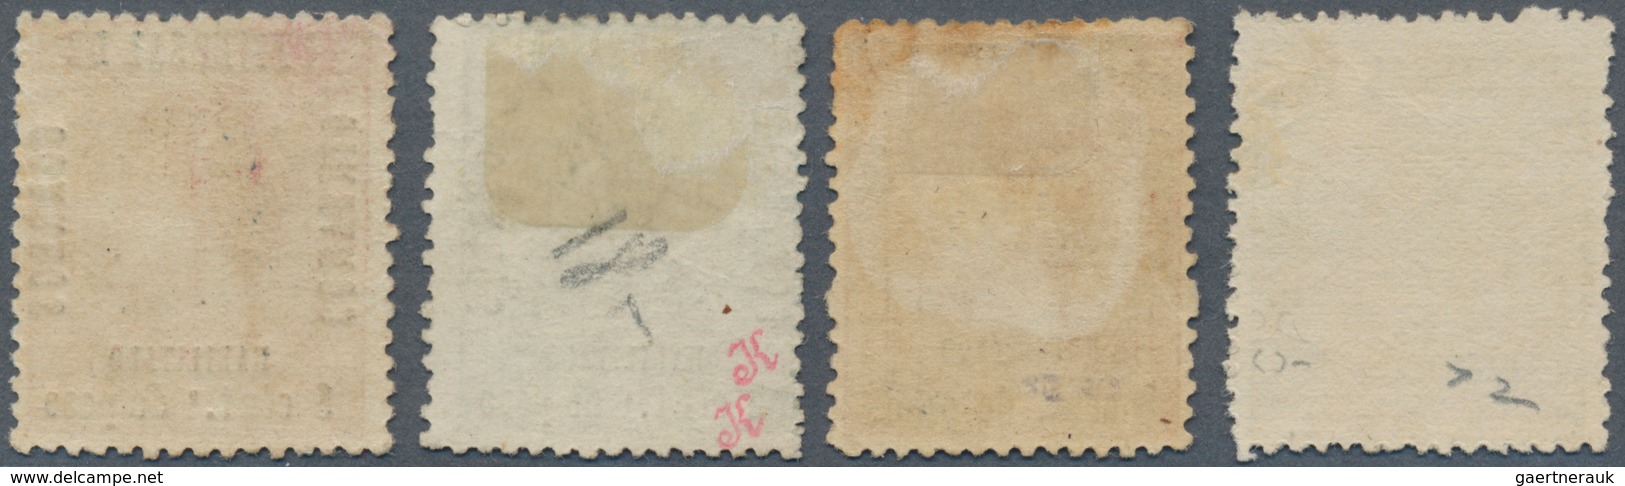 Philippinen: 1879, UPU Overprints, Both Types, Four Values Complete In Normal Perforation, Unused. S - Philippines